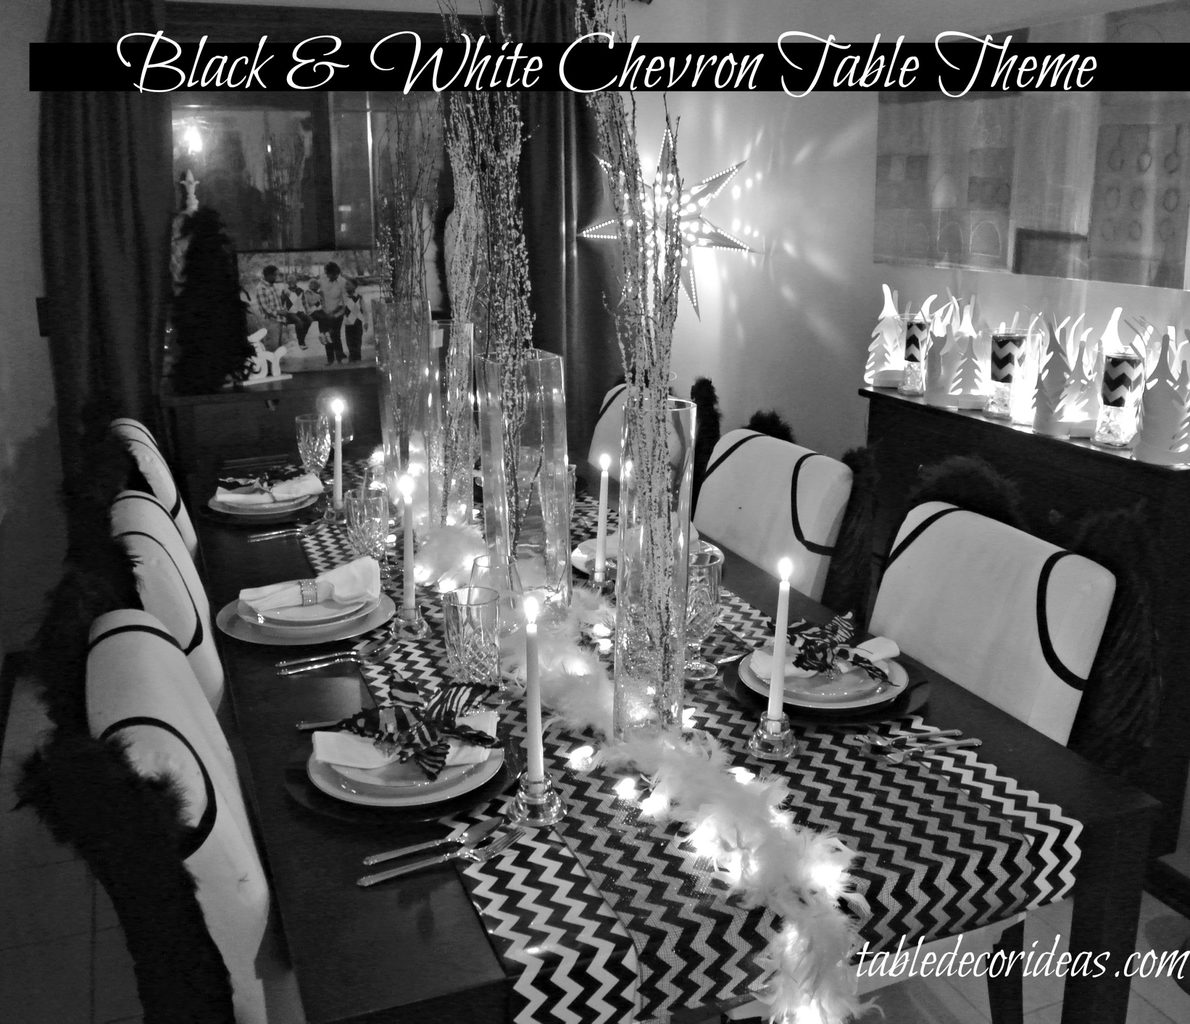 Take your Christmas Decor to new heights and style with this easy Chevron Black & White Christmas Theme